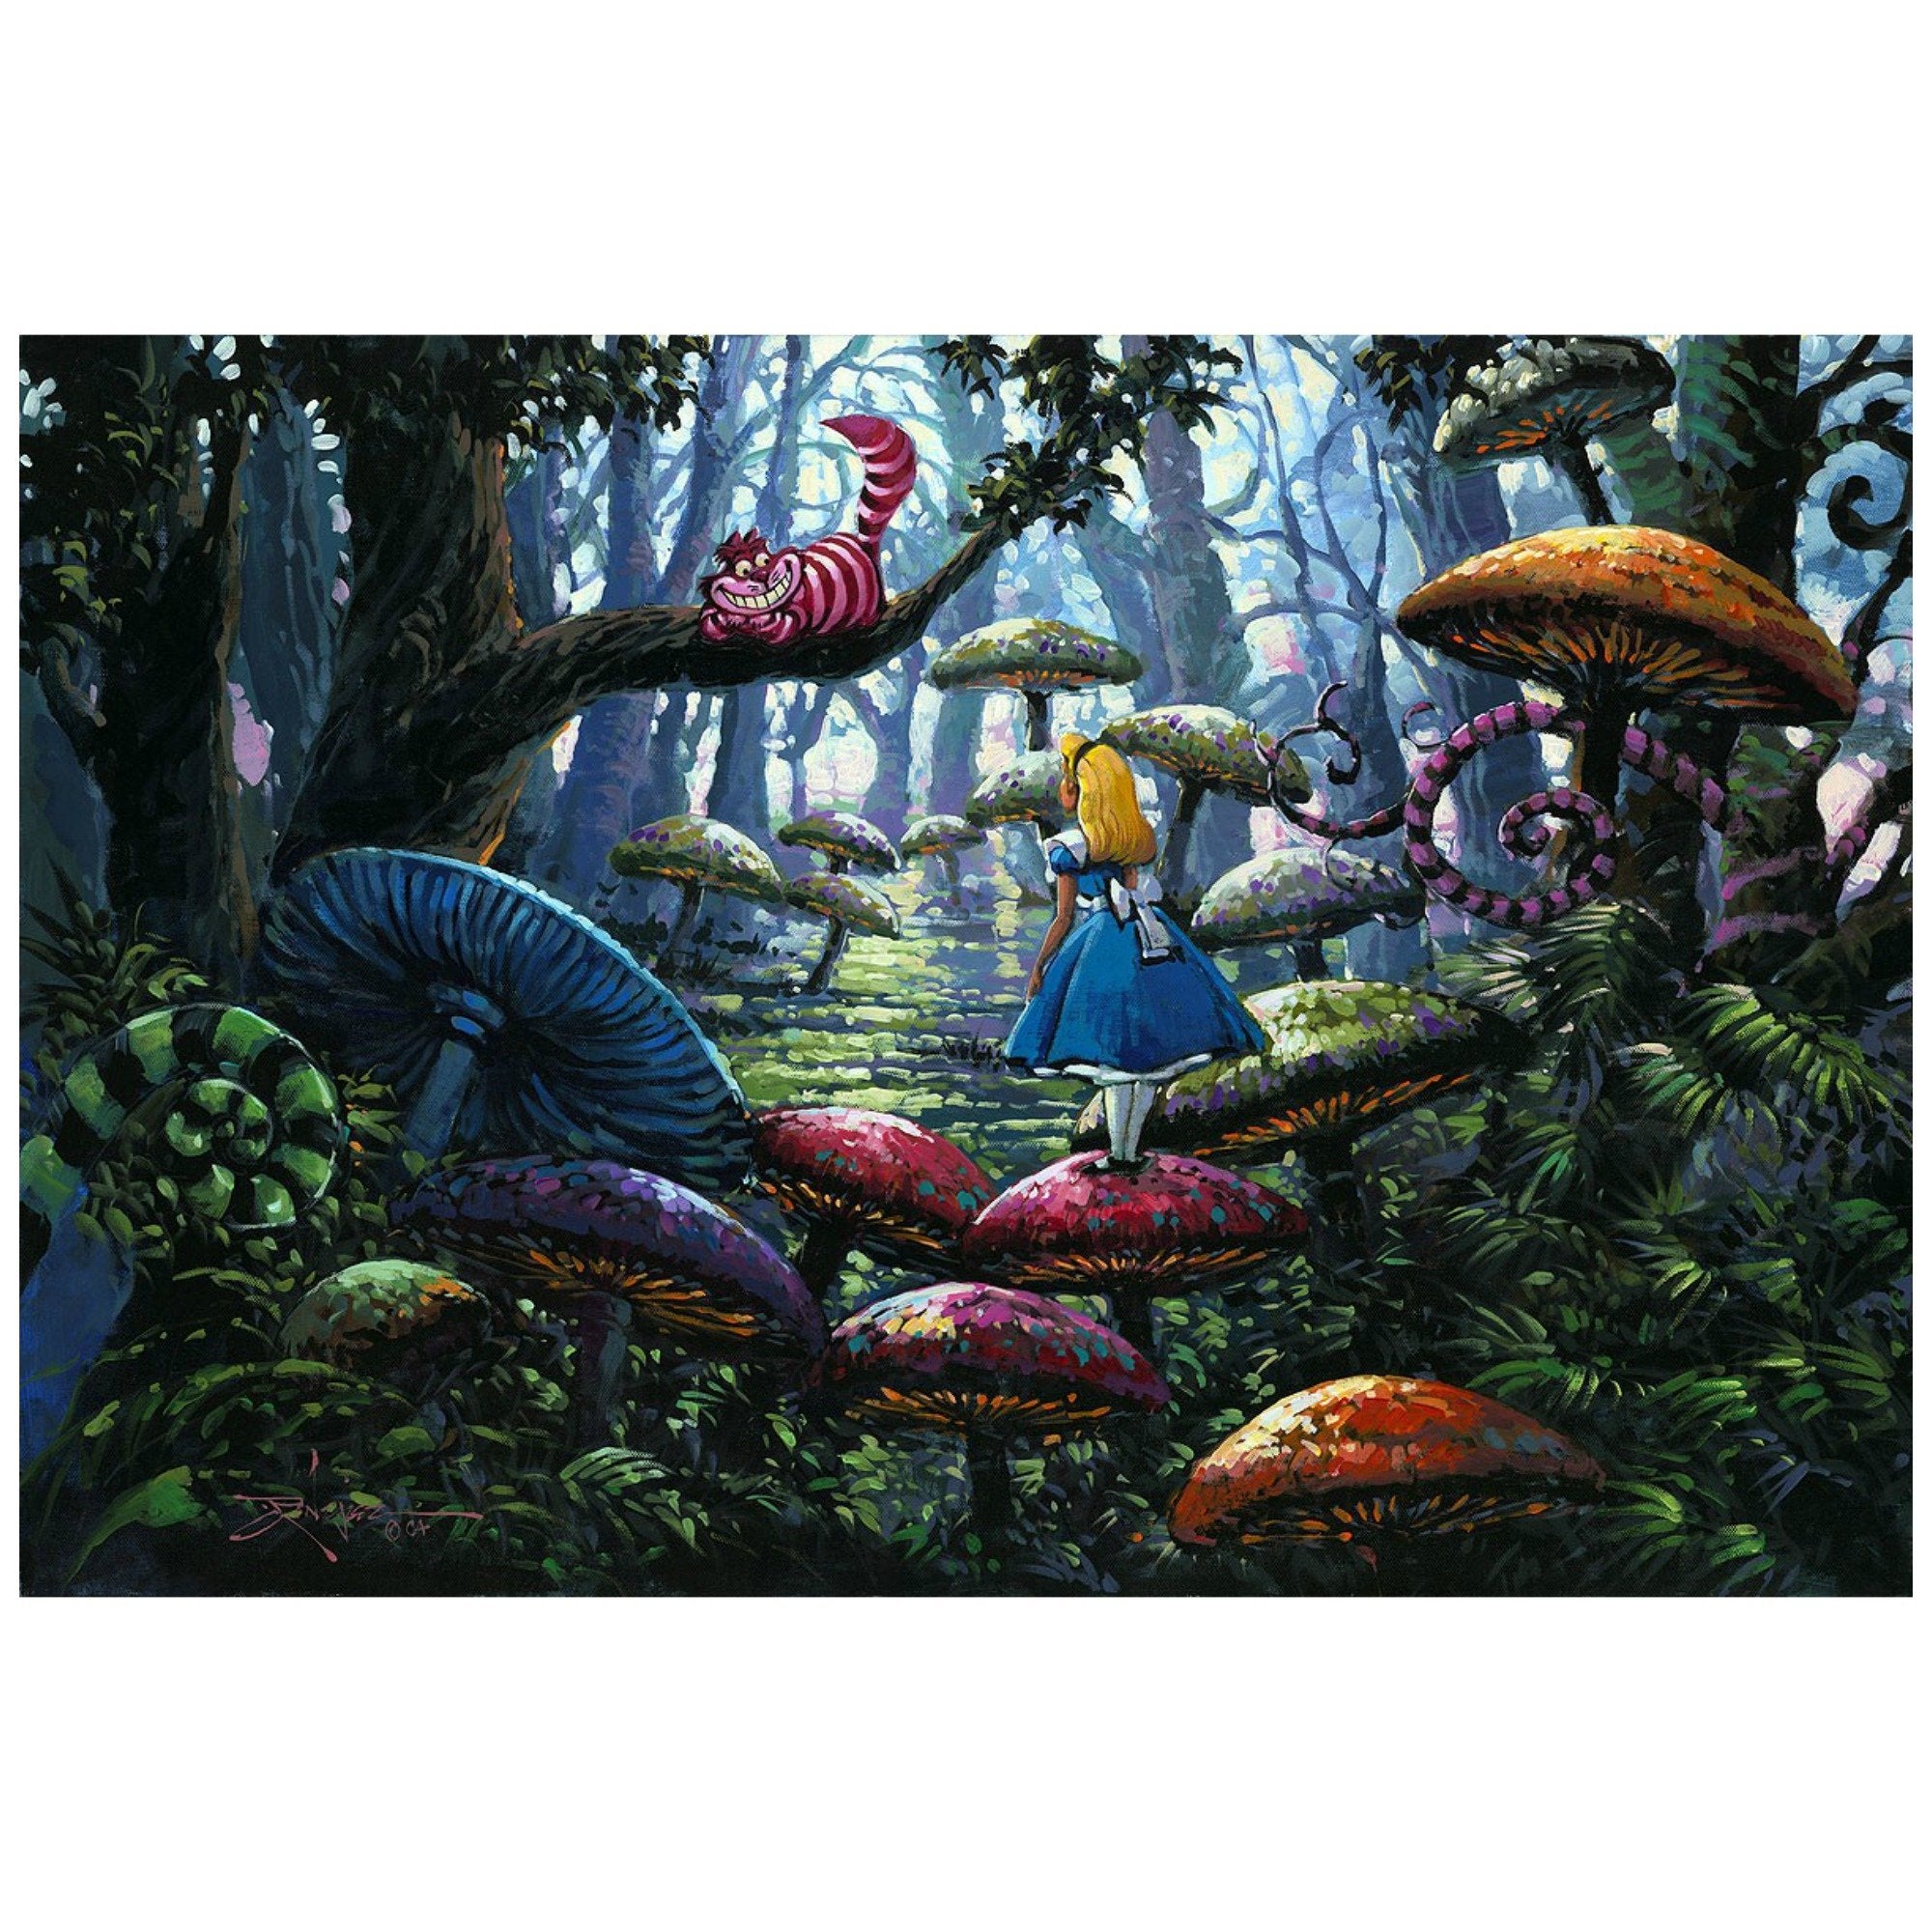  A Smile You Can Trust by Rodel Gonzalez.  Alice is being followed by the Cheshire cat as she wonders through the giant mushrooms trail in the woods of Wonderland.